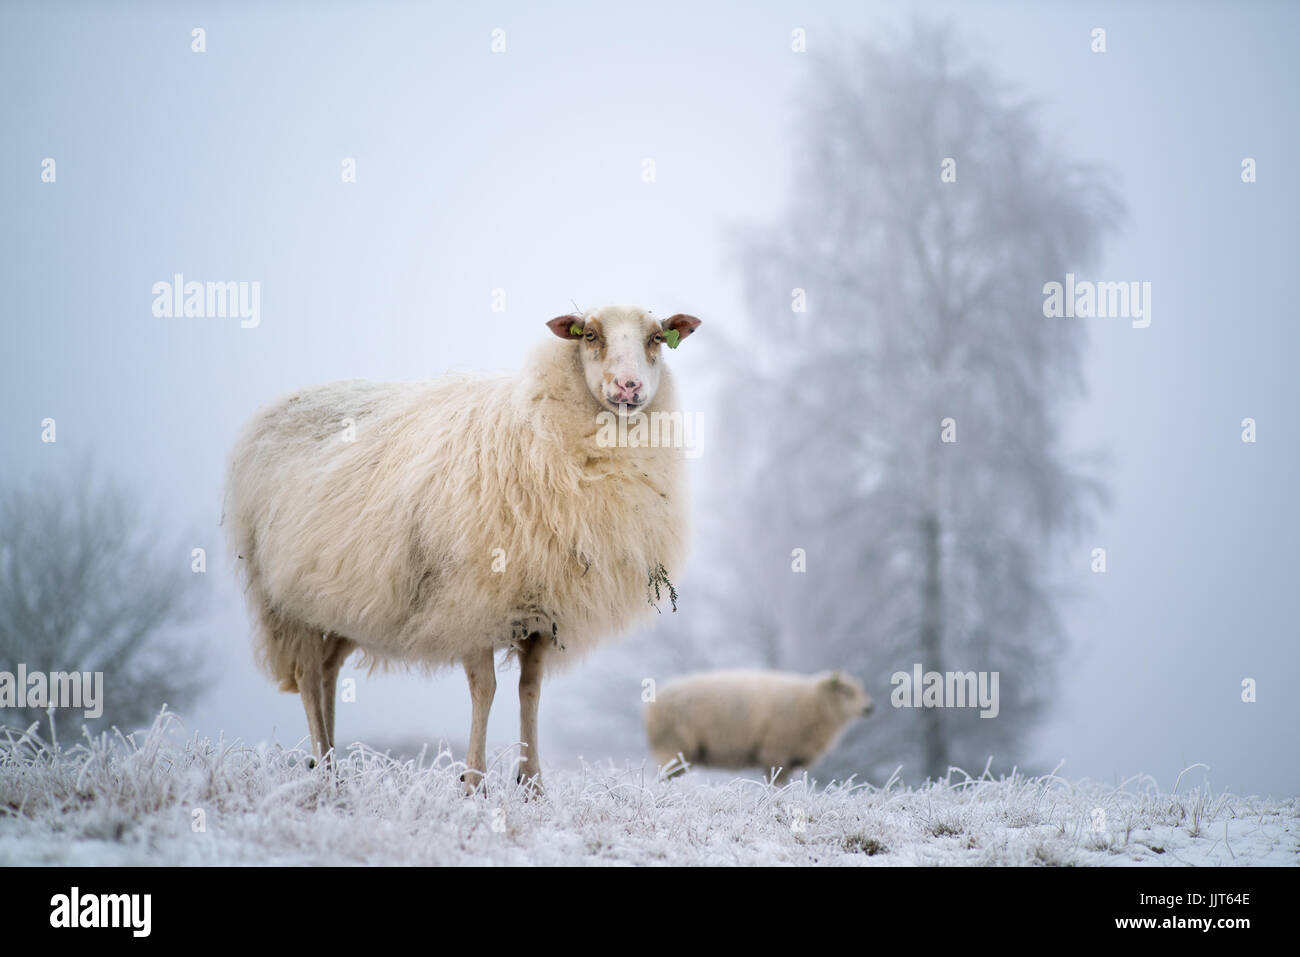 A curious sheep in a frozen wintry scene Stock Photo